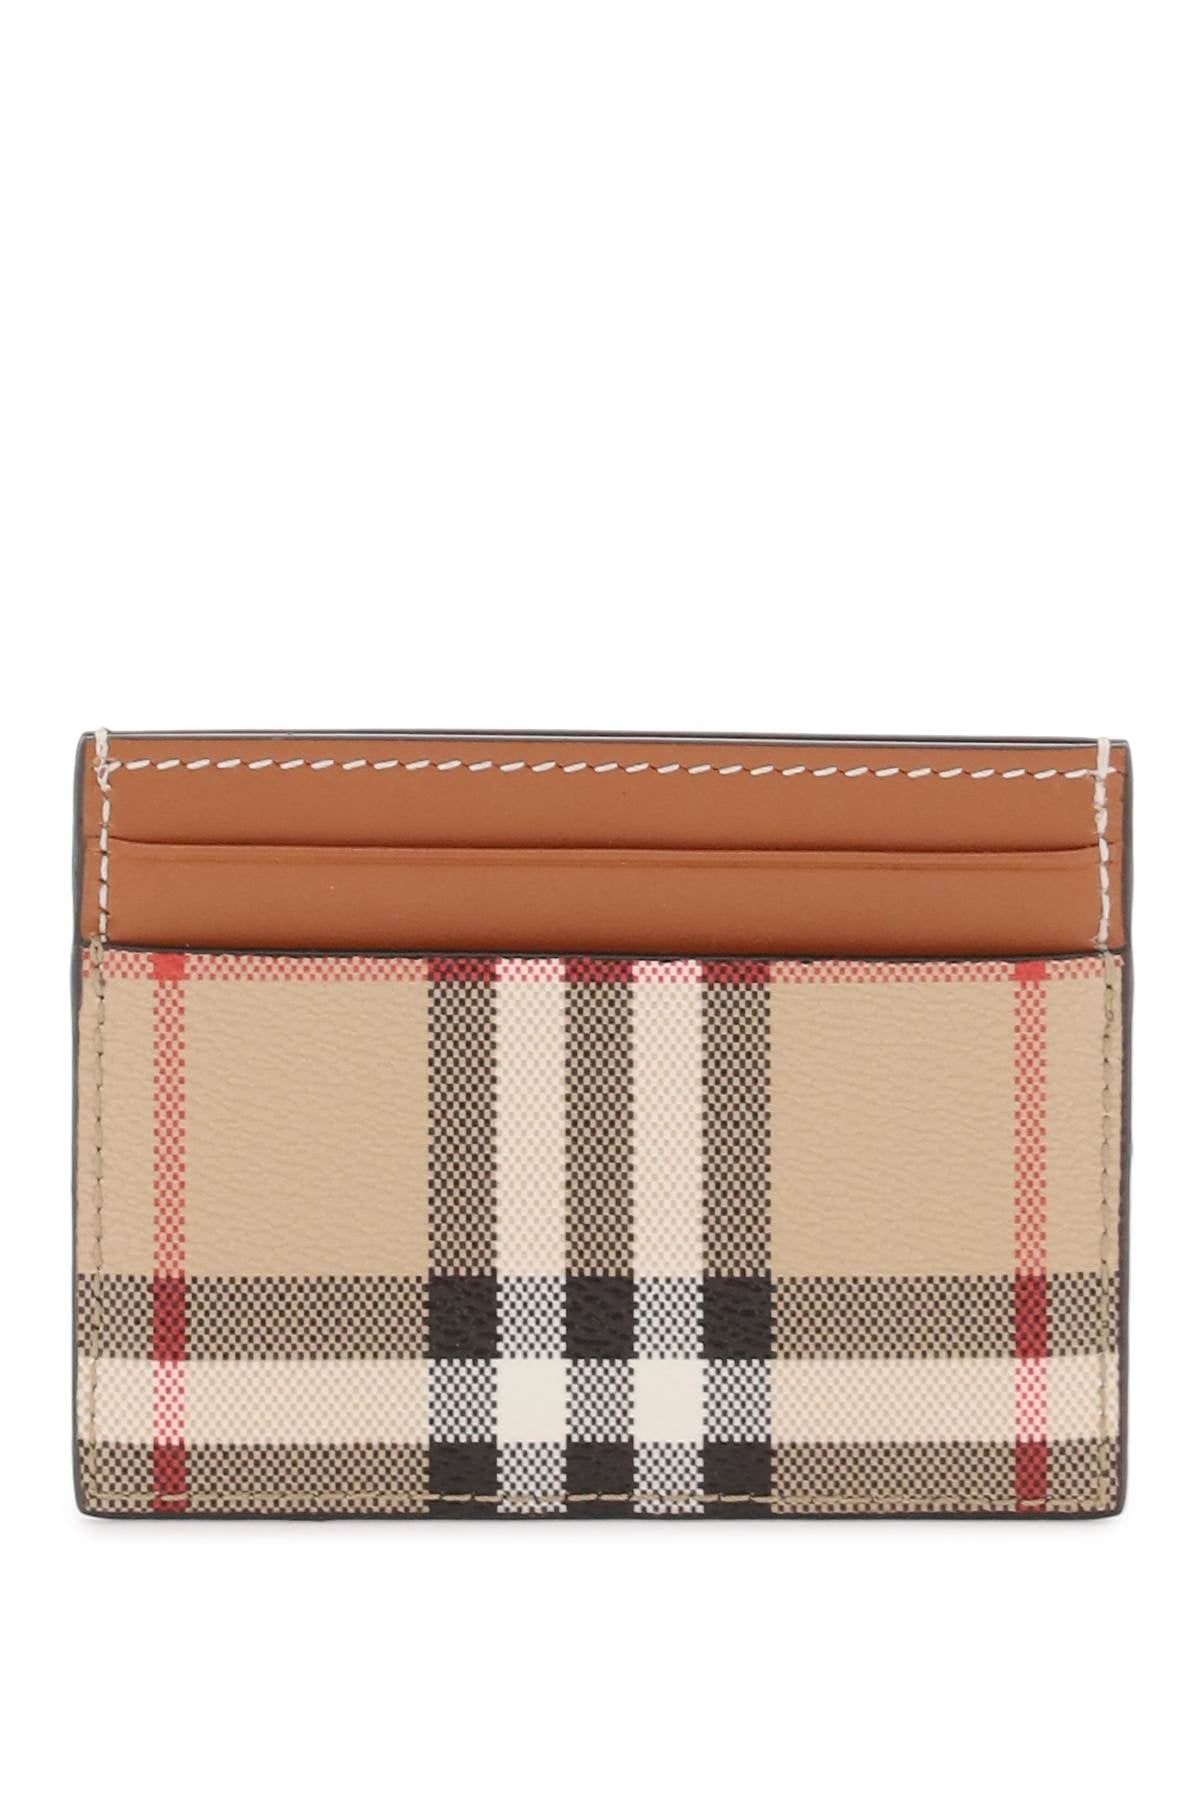 Burberry Burberry card holder with tartan pattern